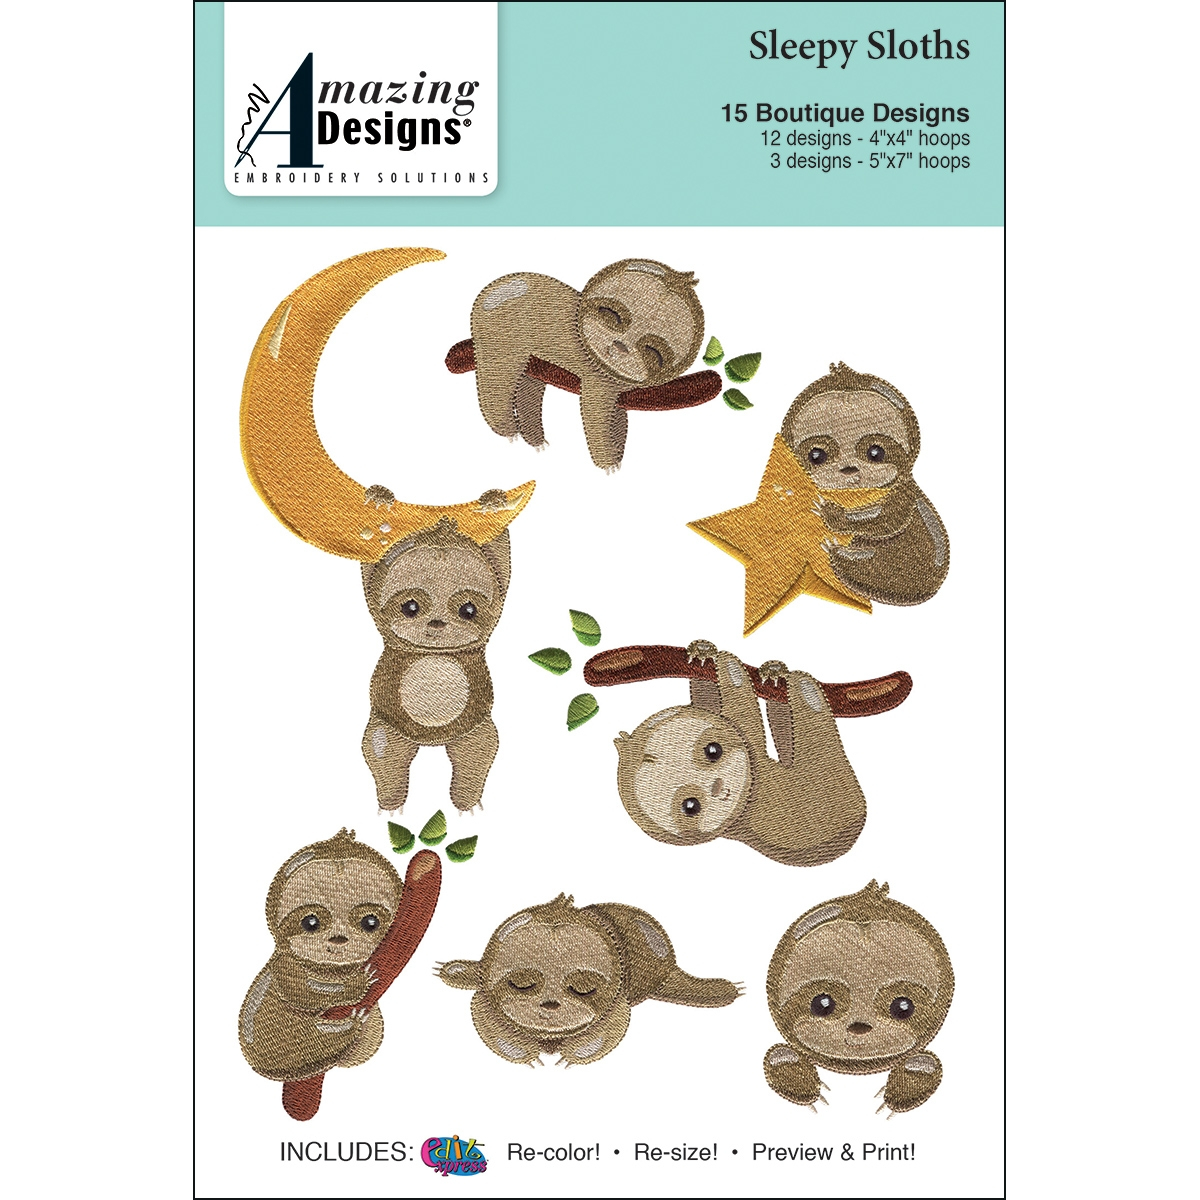 Free Machine Embroidery Patterns To Download Sleepy Sloth Embroidery Designs